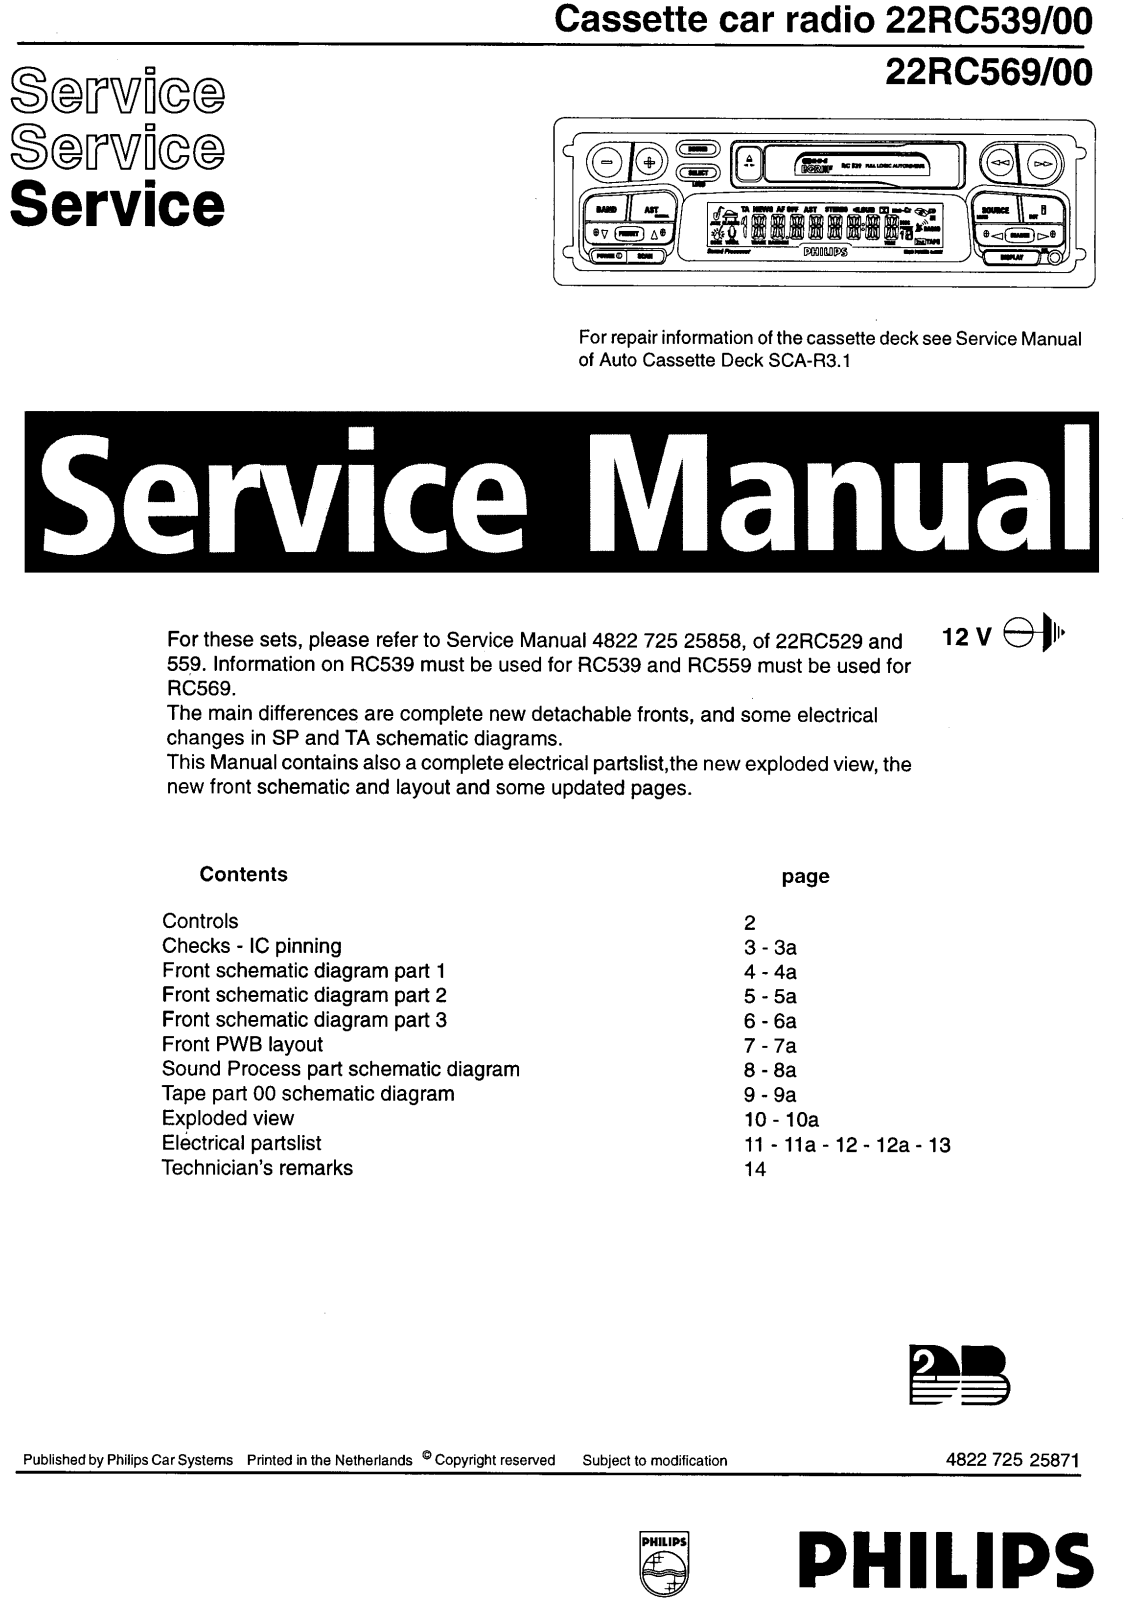 PHILIPS 22RC539-00, 22RC569-00 Service Manual